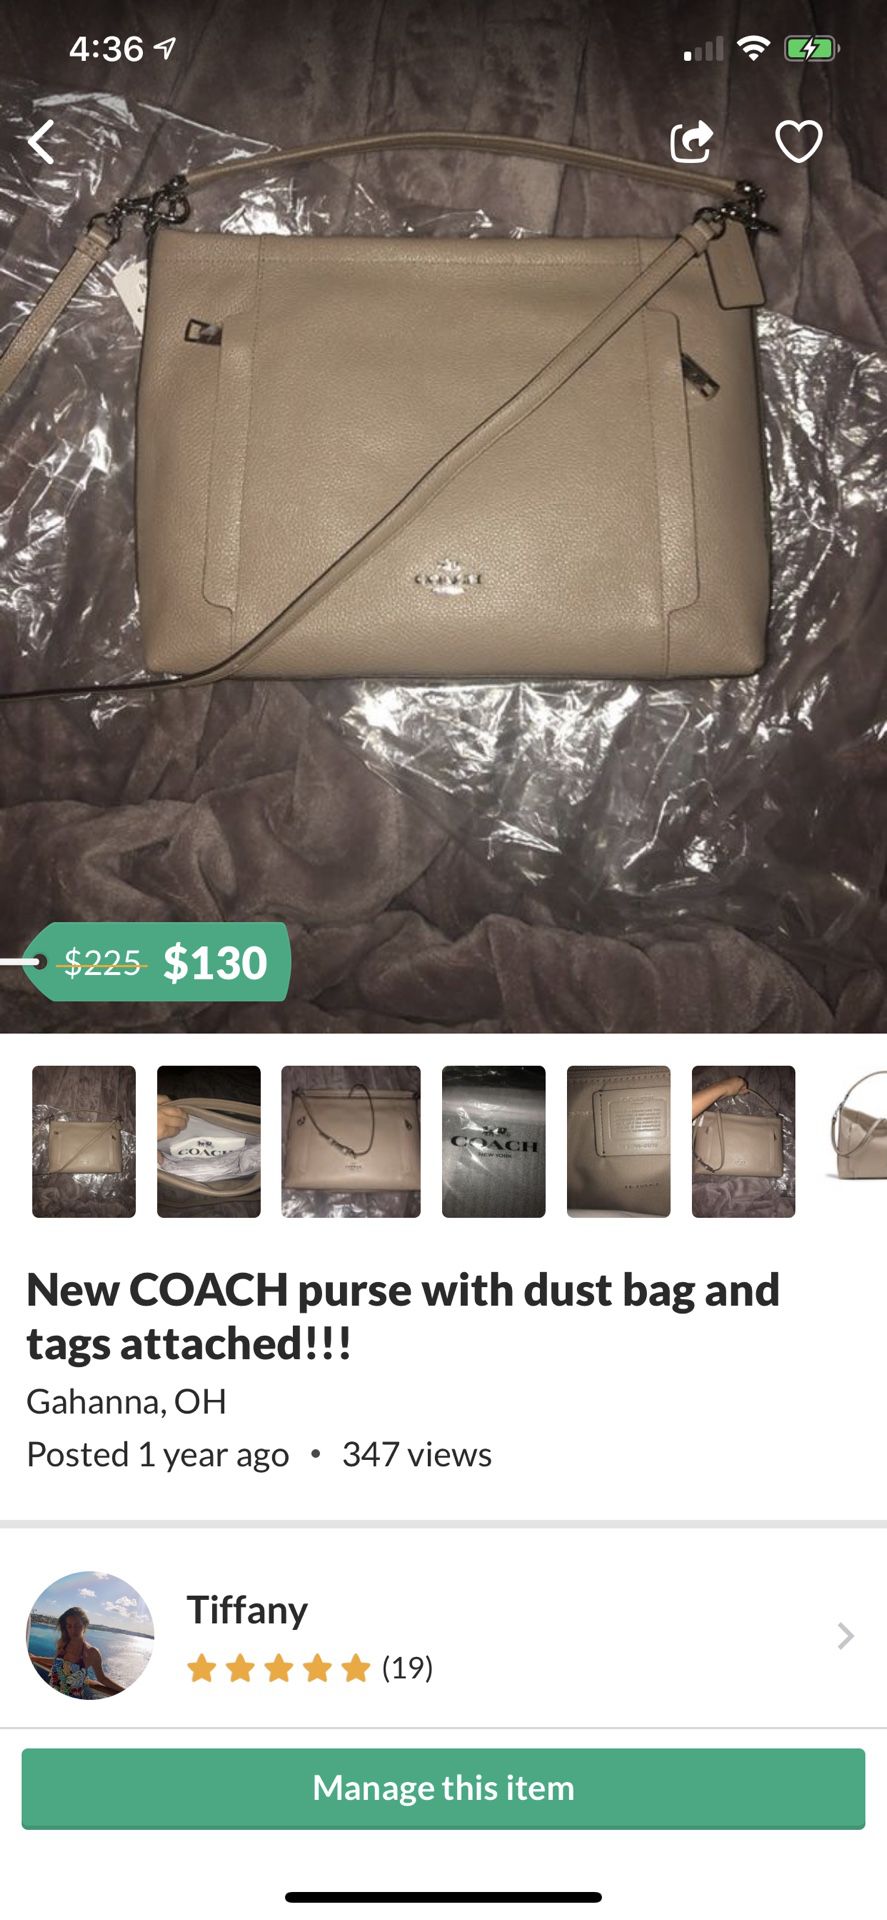 New COACH purse with dust bag and tags attached!!!